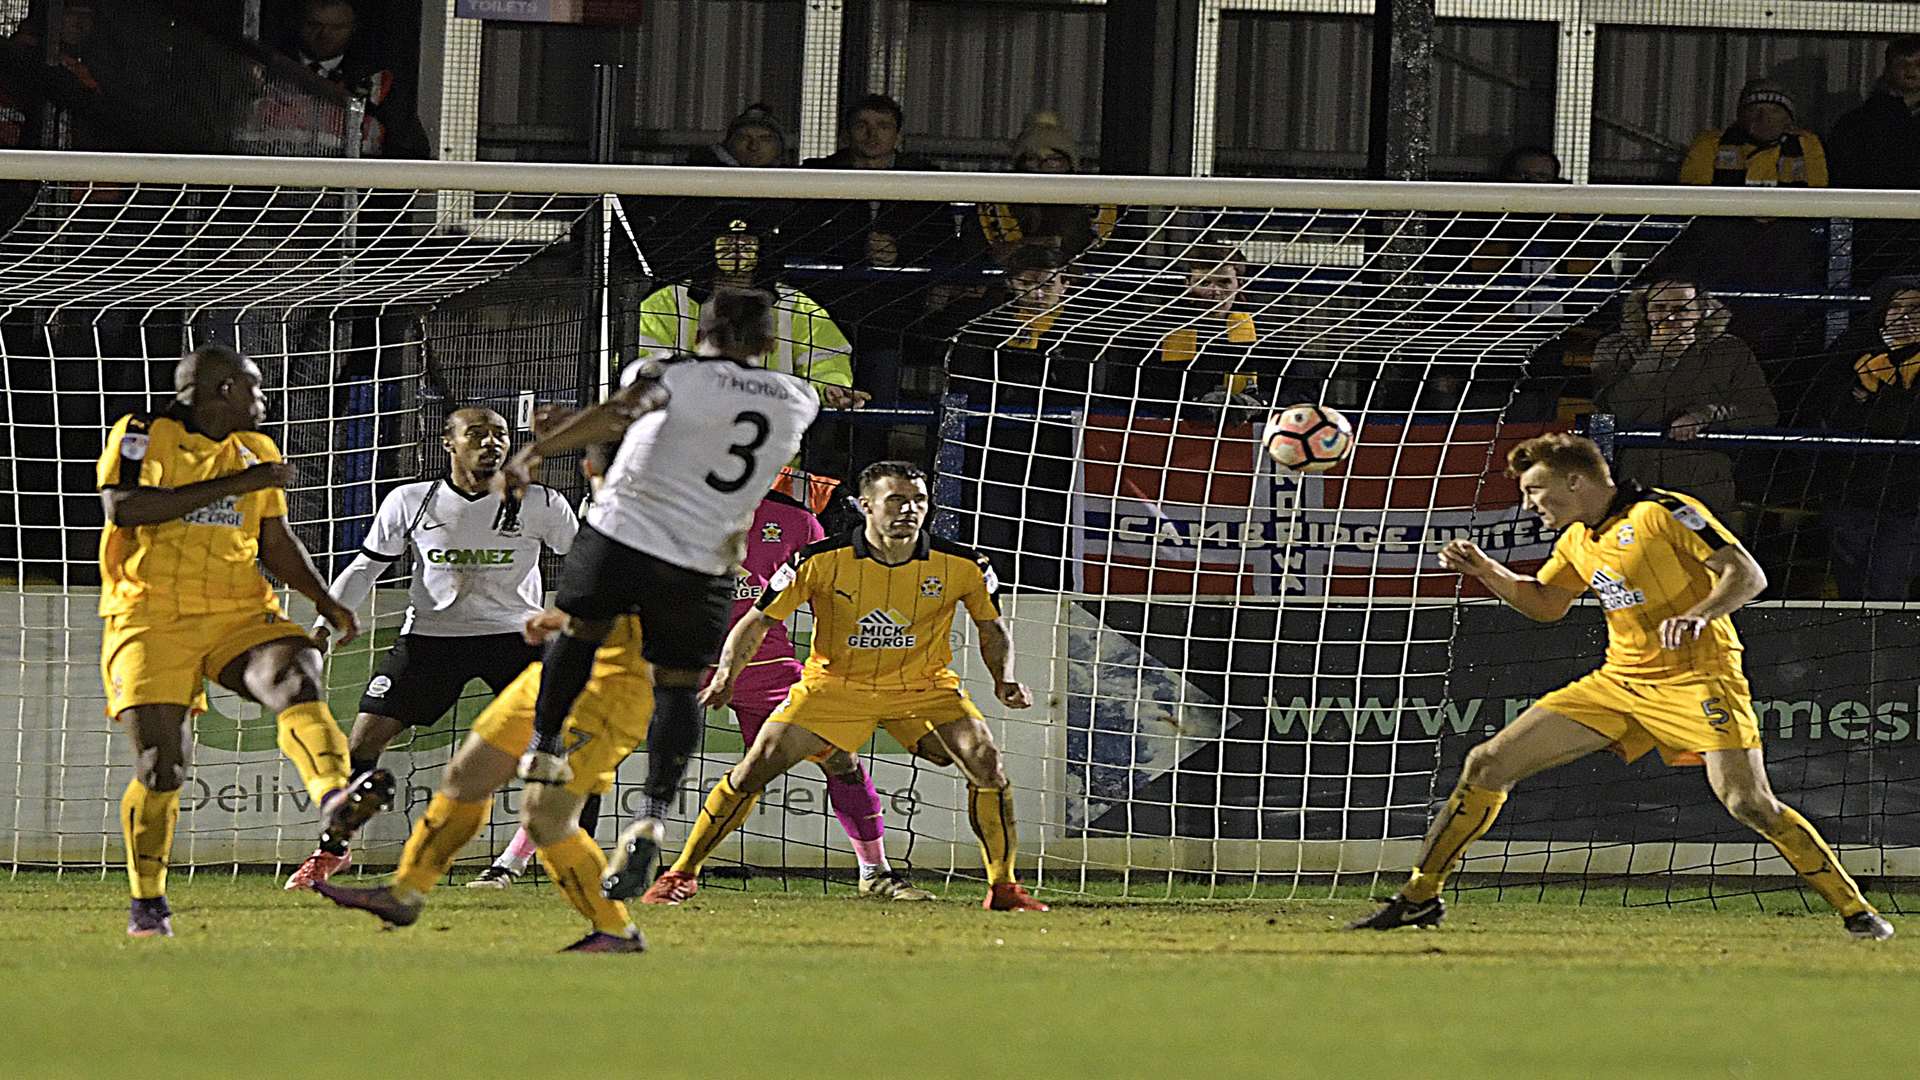 Dover's Aswad Thomas scores from the edge of the penalty area. Picture: Barry Goodwin